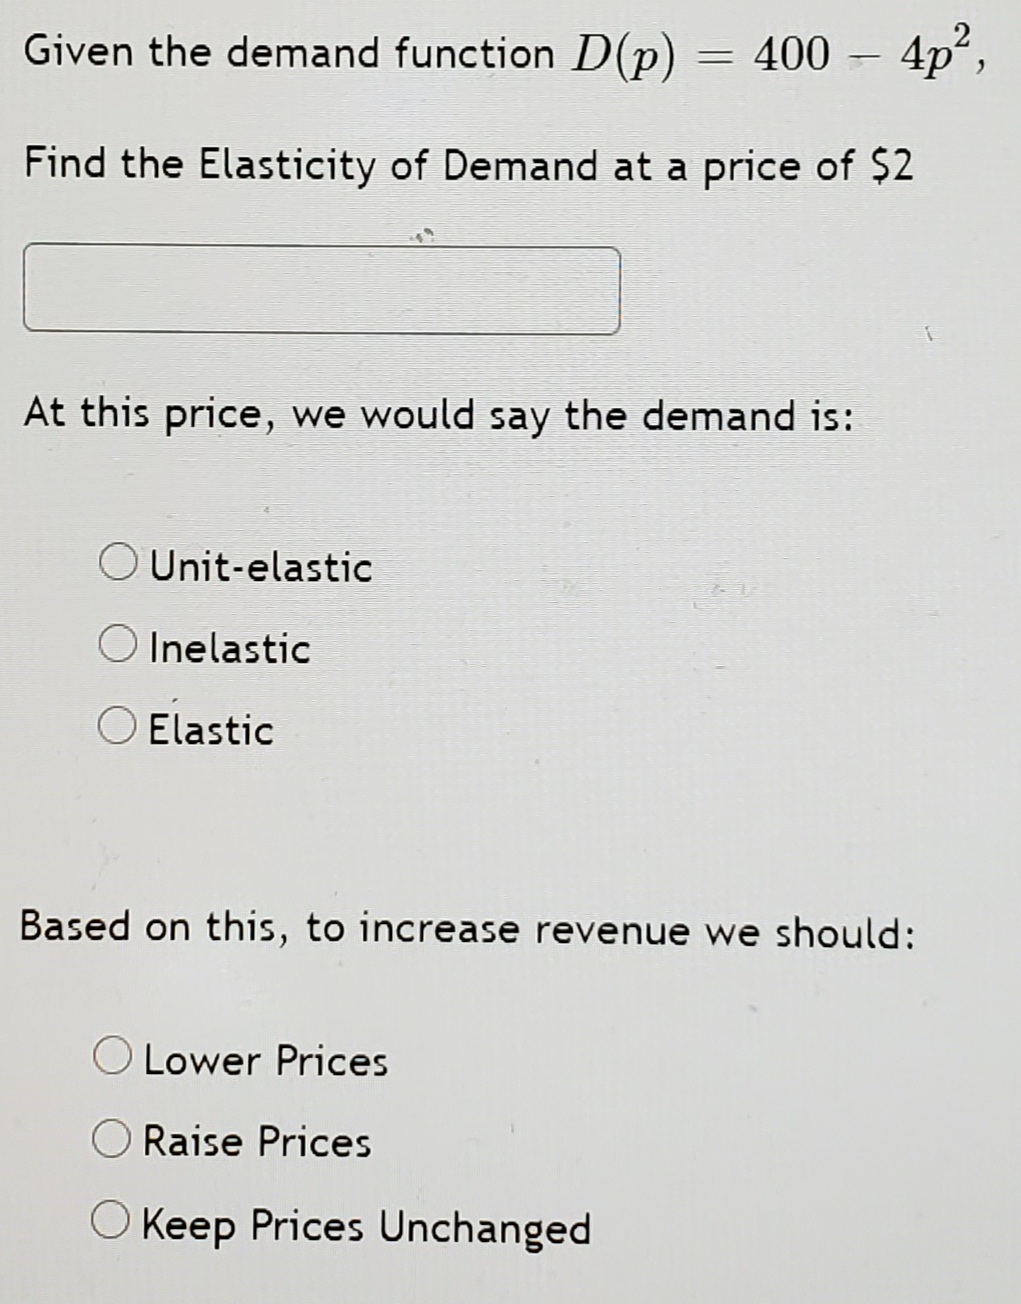 Given the demand function D(p)
= 400 –
4p",
Find the Elasticity of Demand at a price of $2
At this price, we would say the demand is:
O Unit-elastic
O Inelastic
O Elastic
Based on this, to increase revenue we should:
Lower Prices
O Raise Prices
O Keep Prices Unchanged
